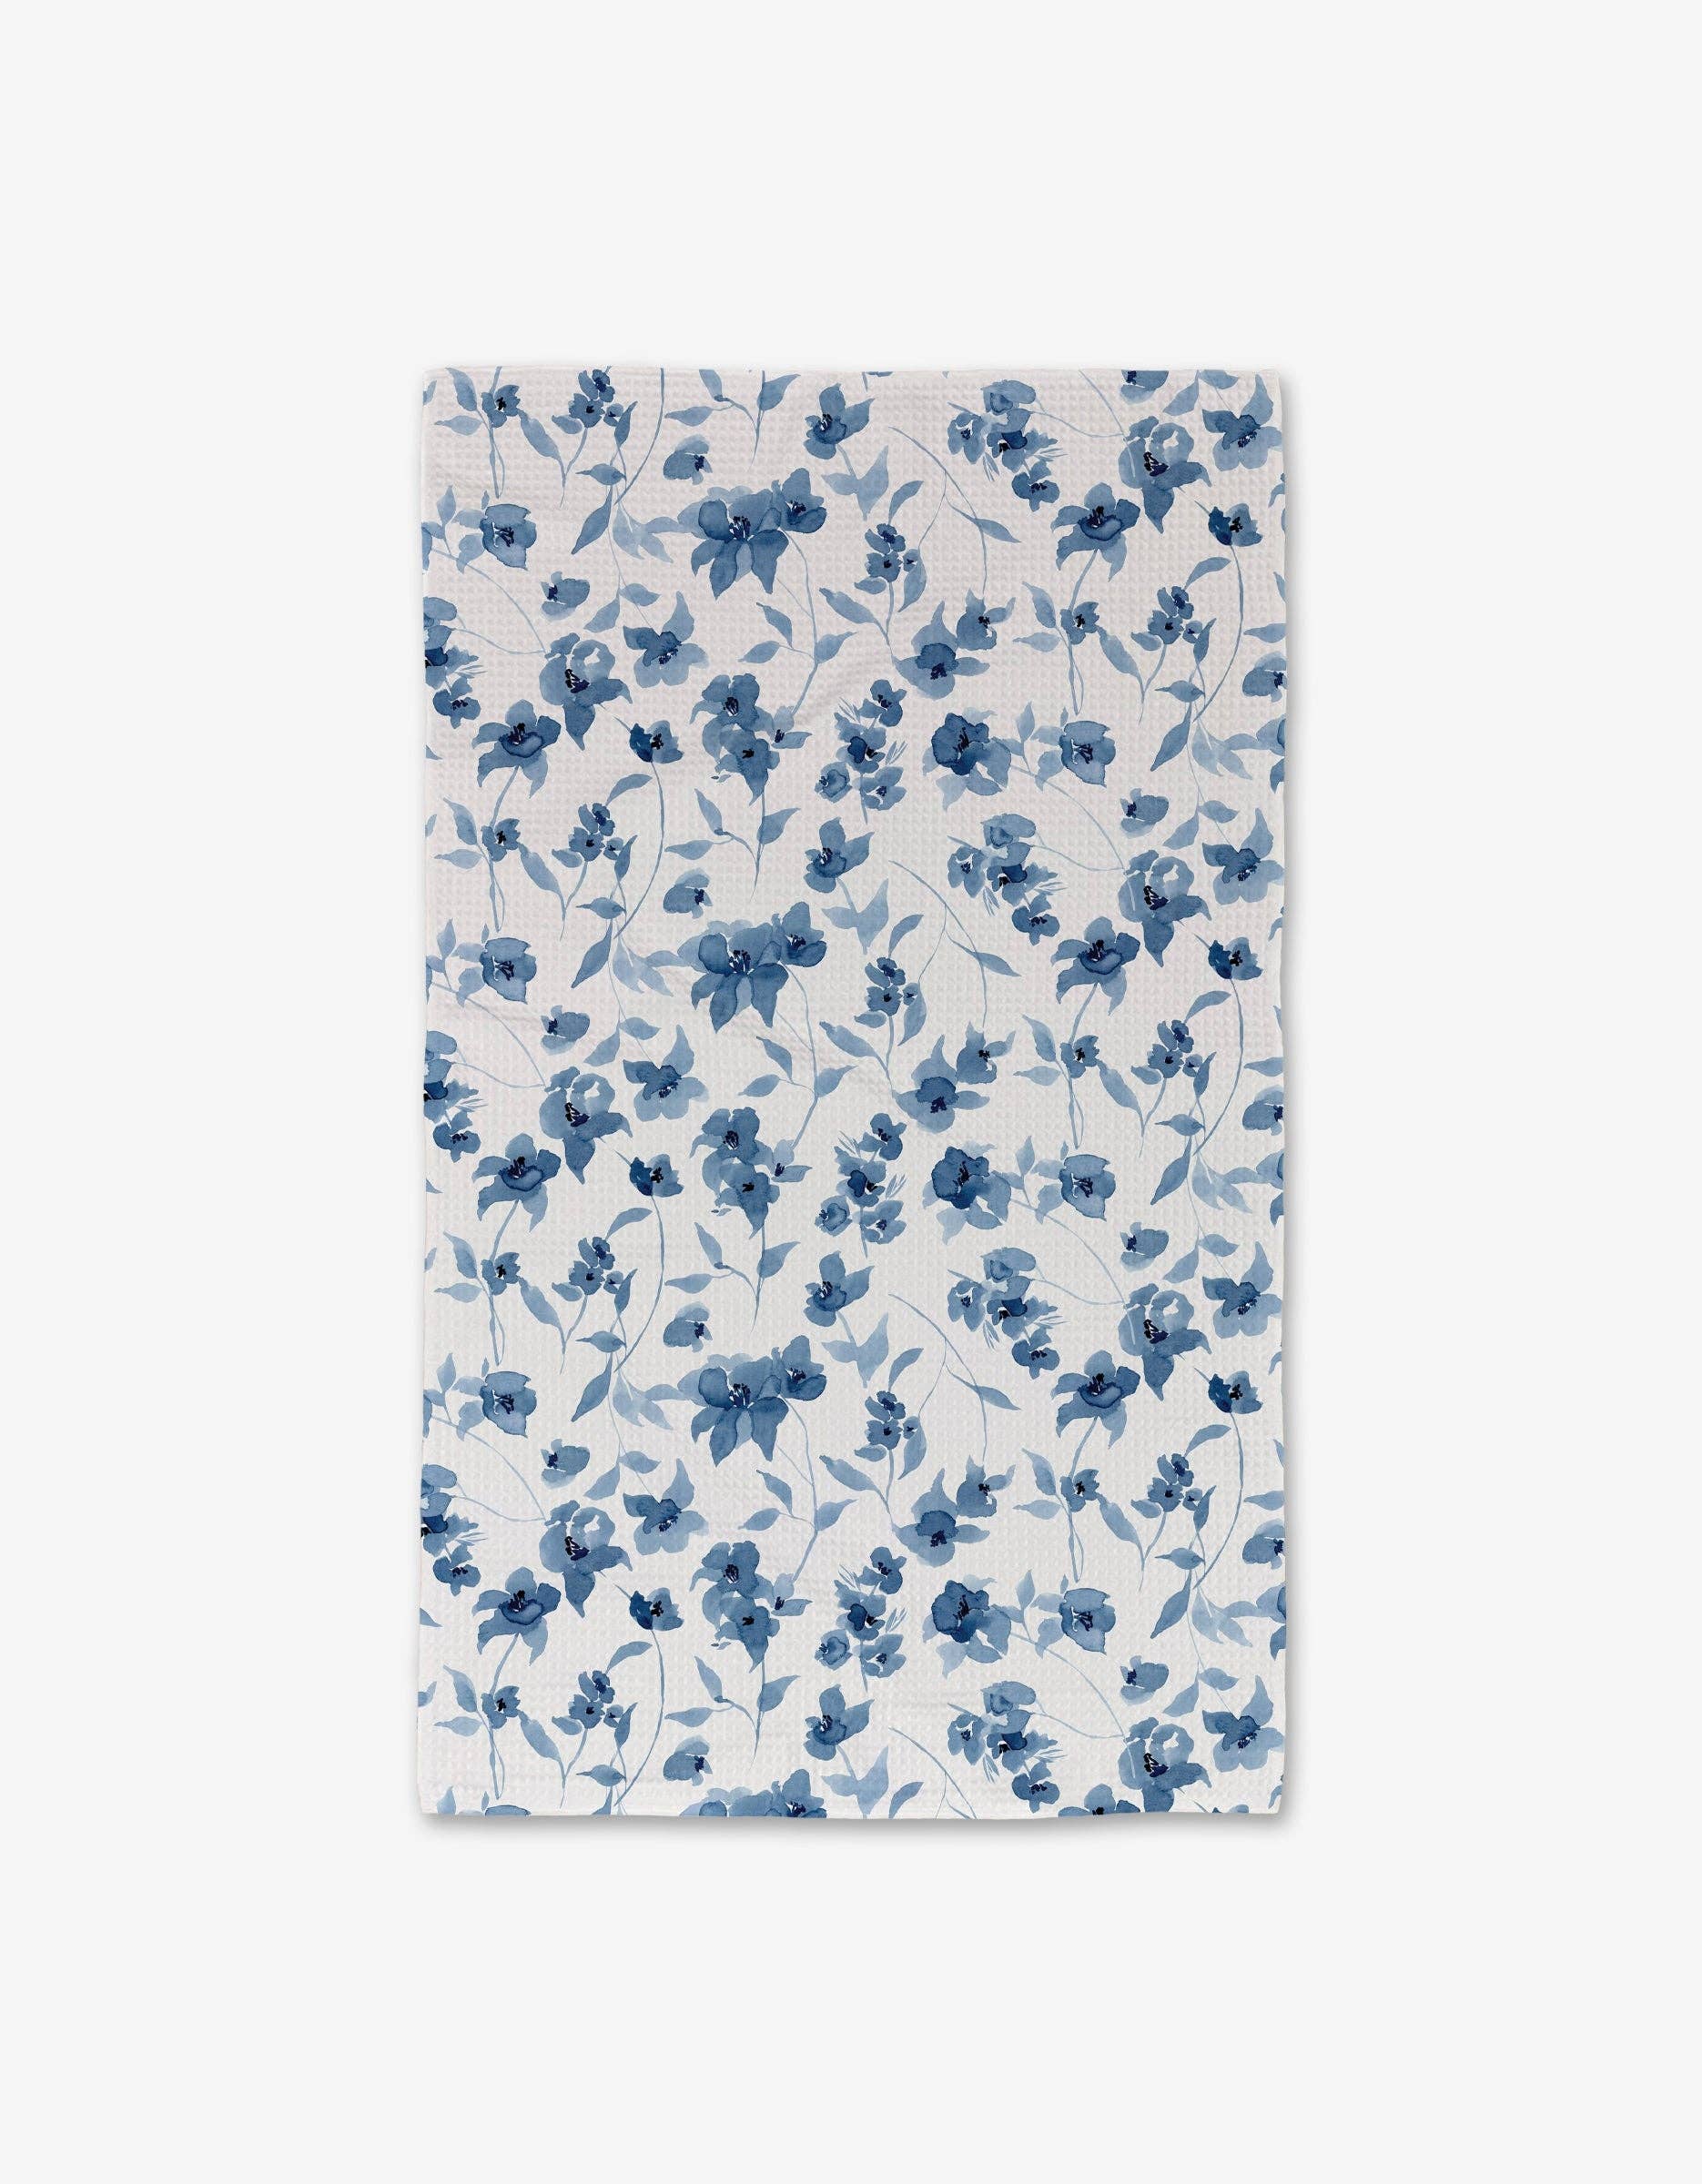 Blue Floral Luxe Hand Towel by Geometry. Towel has a blue floral print on a white background.